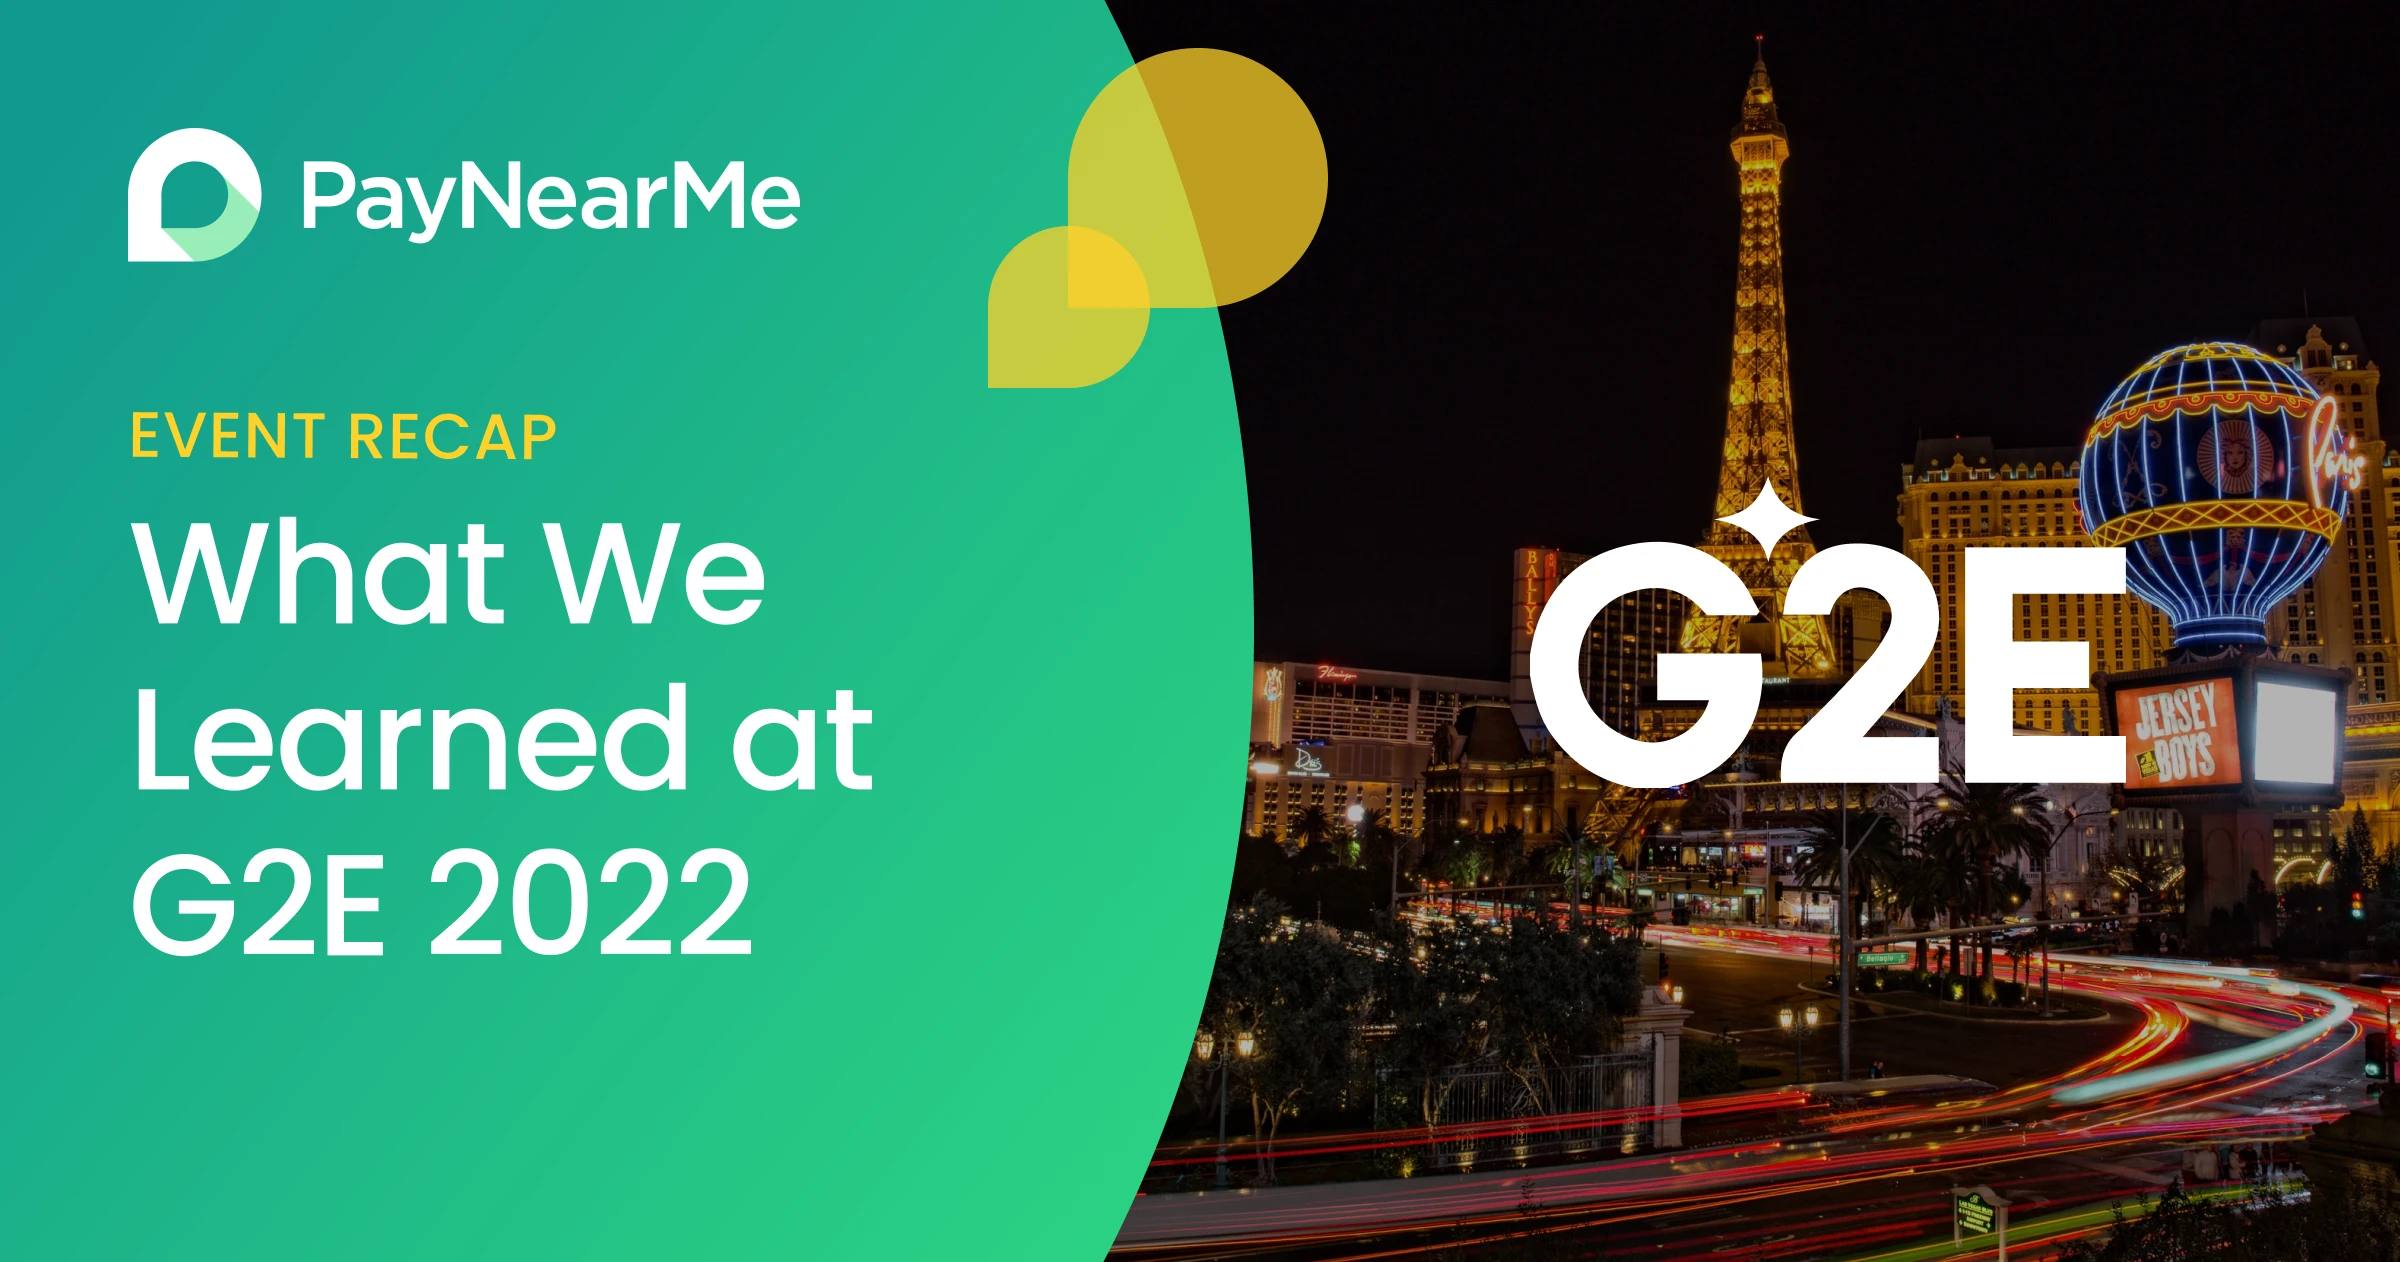 What We Learned at G2E 2022